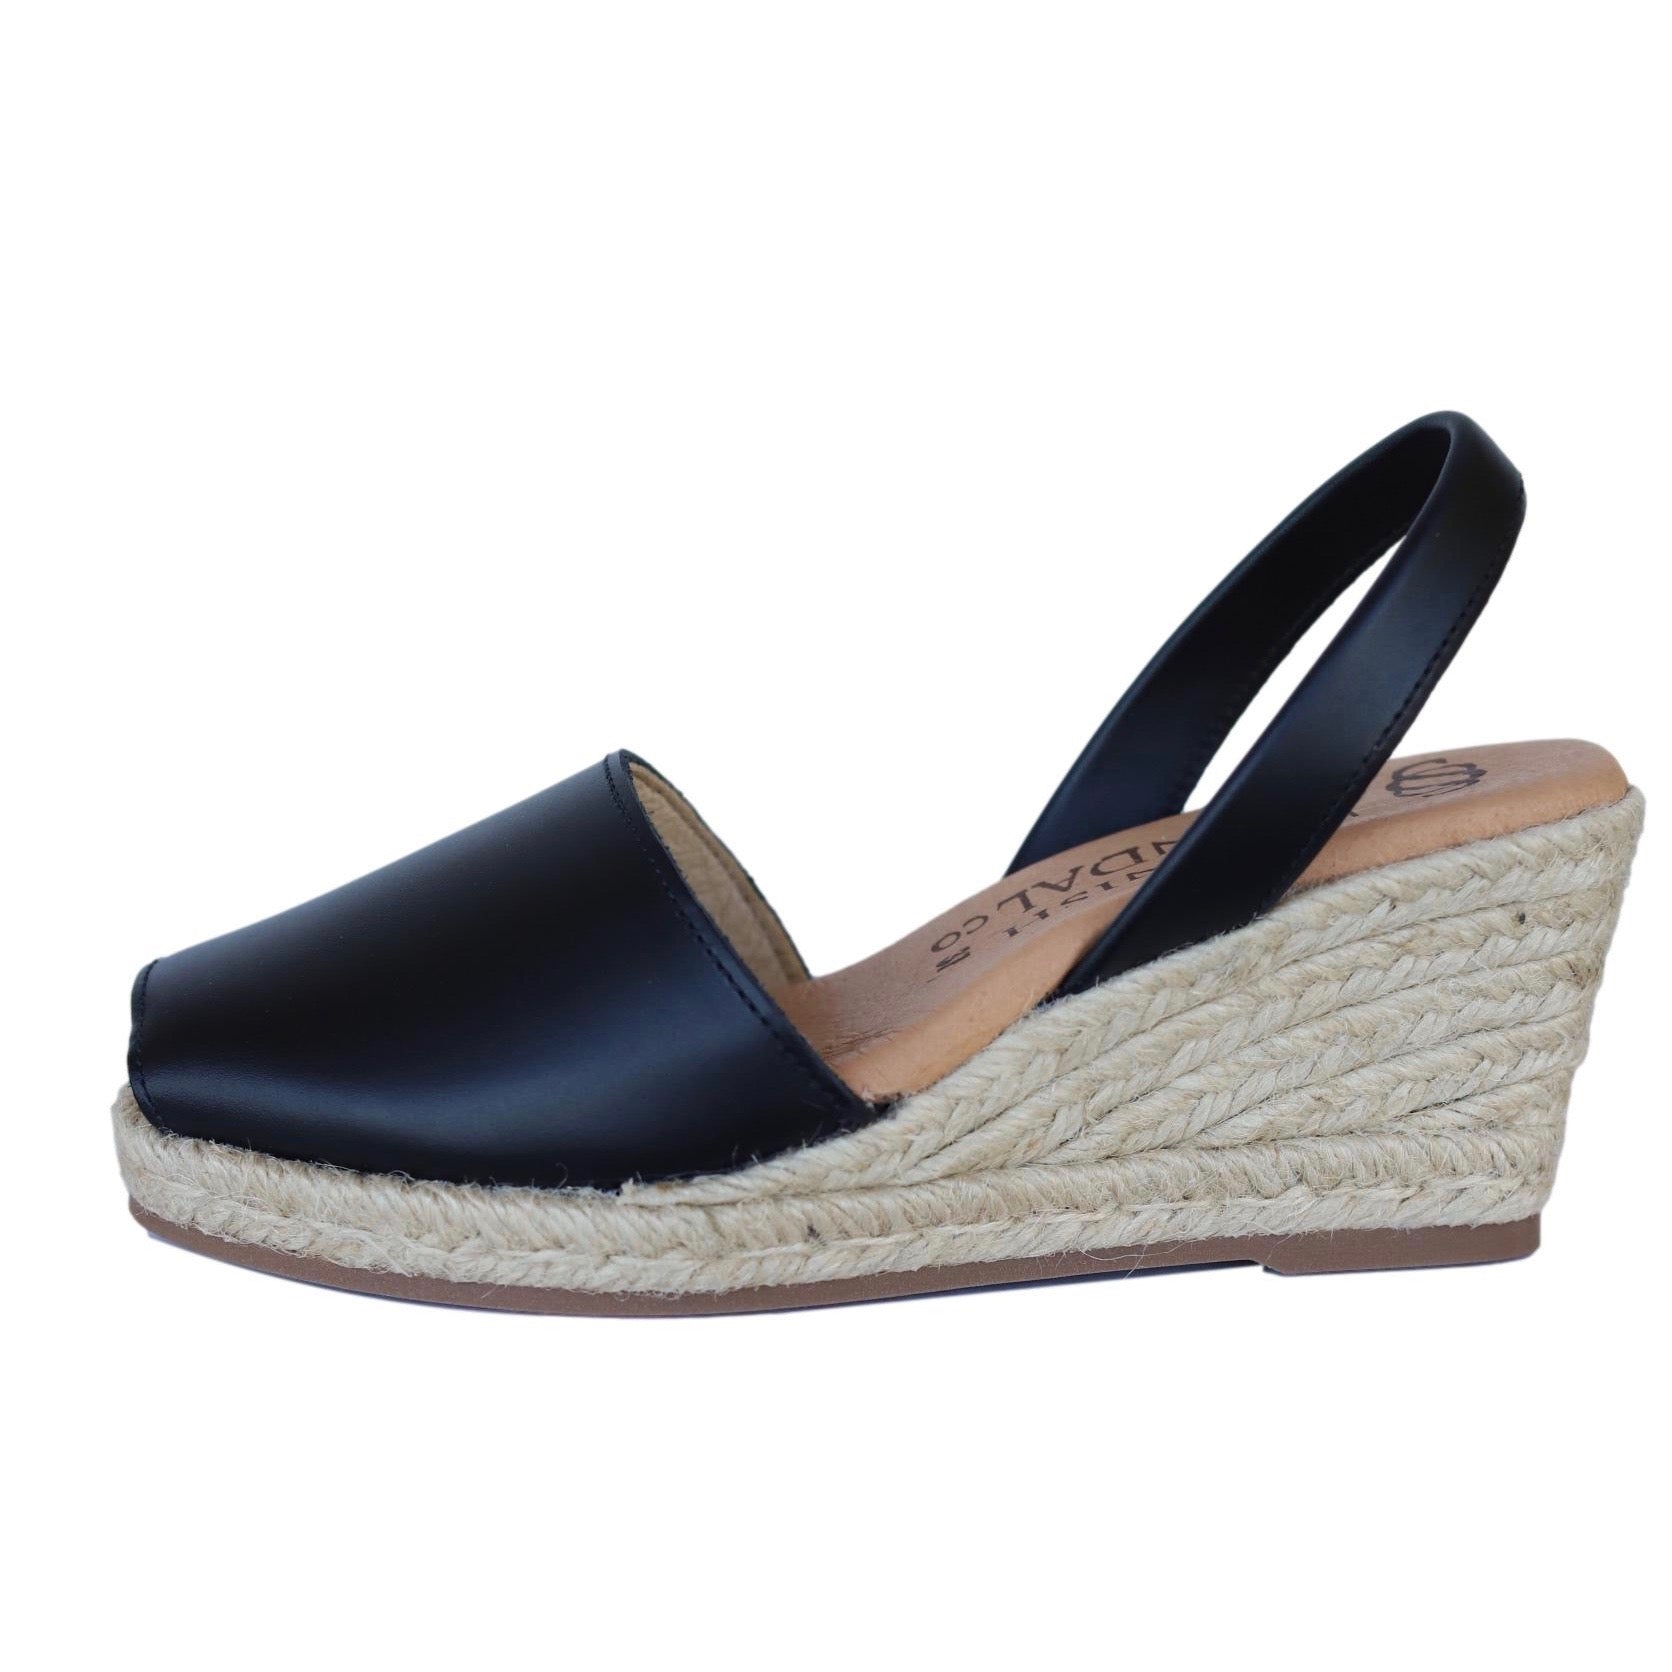 profile view of wedge espadrille sandals in black